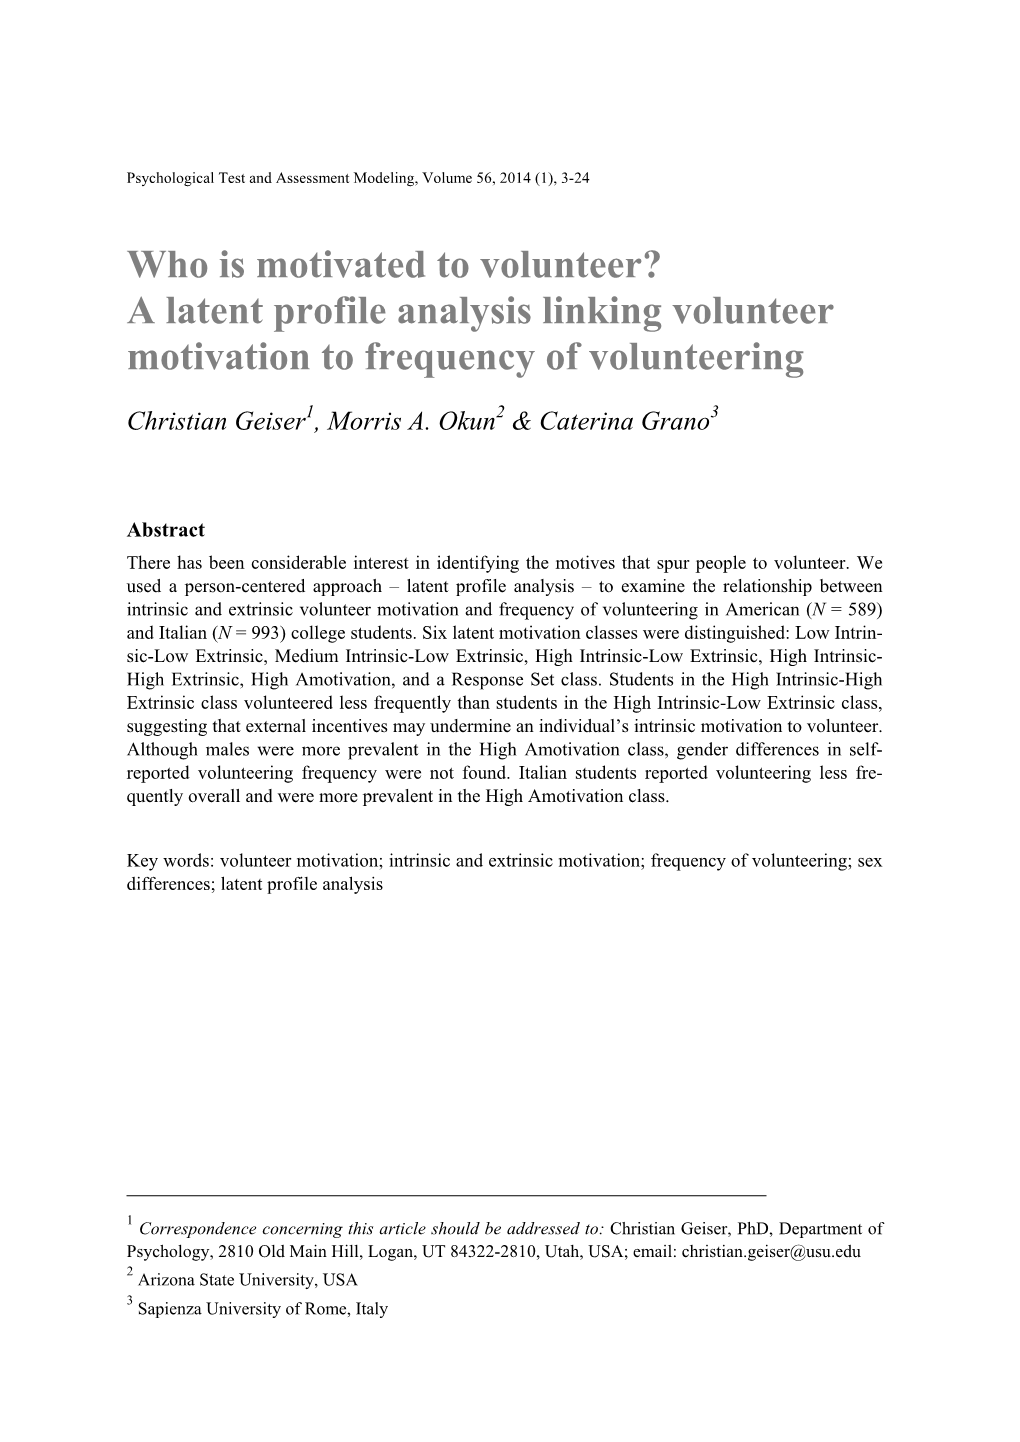 A Latent Profile Analysis Linking Volunteer Motivation to Frequency of Volunteering